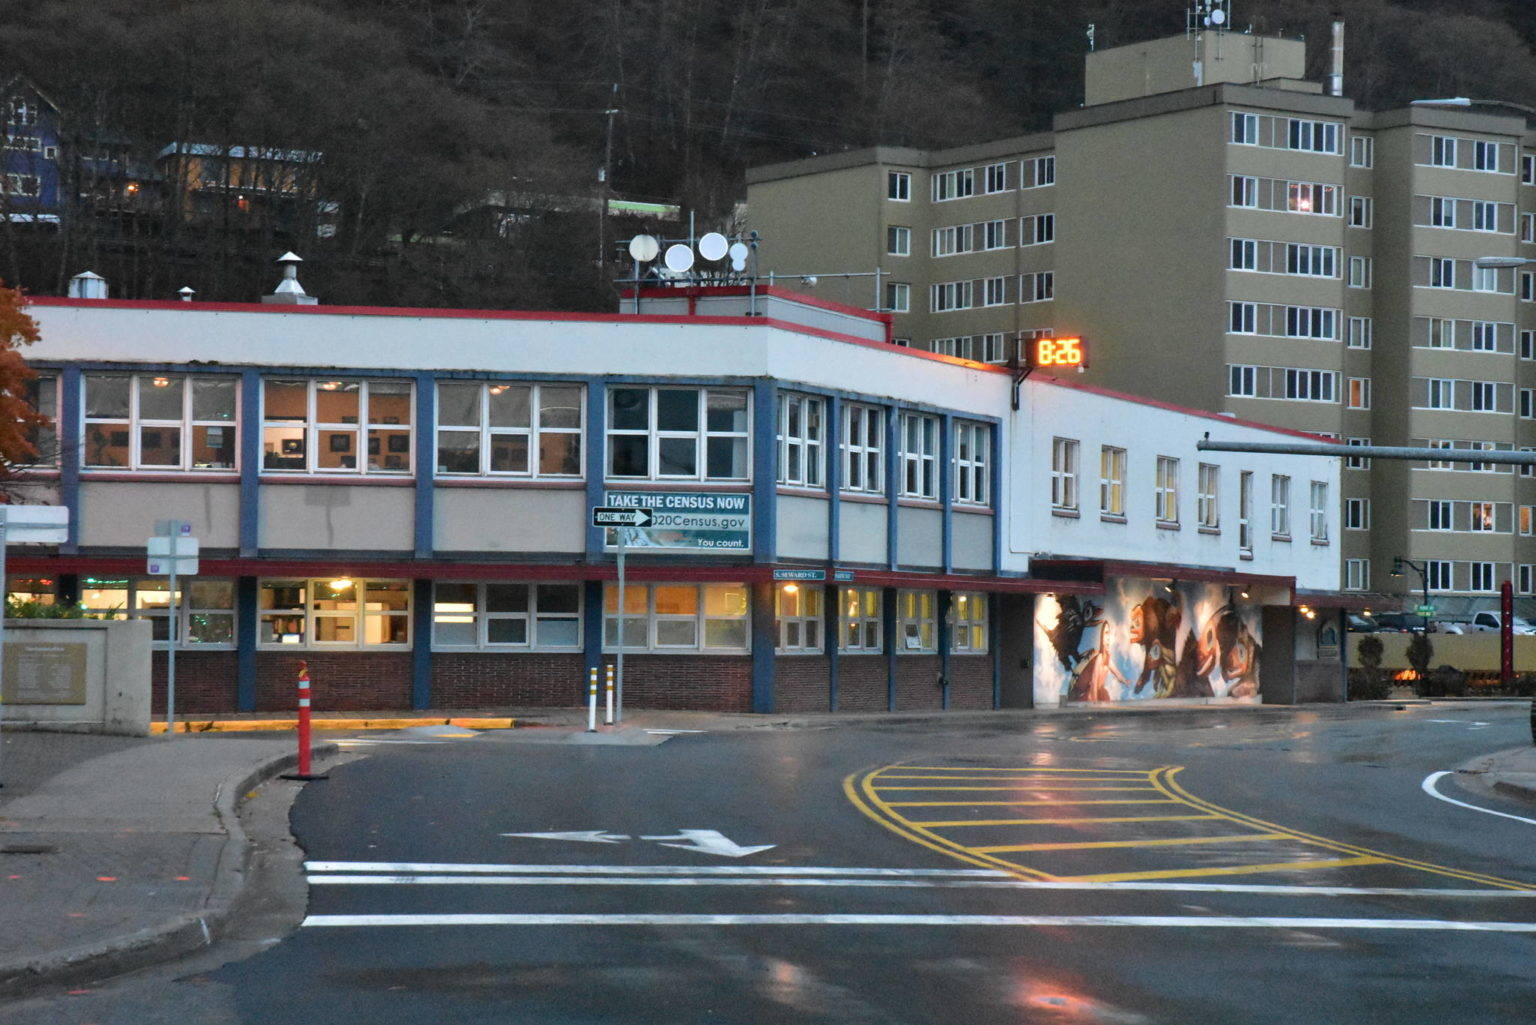 This photo shows Juneau City Hall on Tuesday, Oct. 24. (Peter Segall / Juneau Empire File)